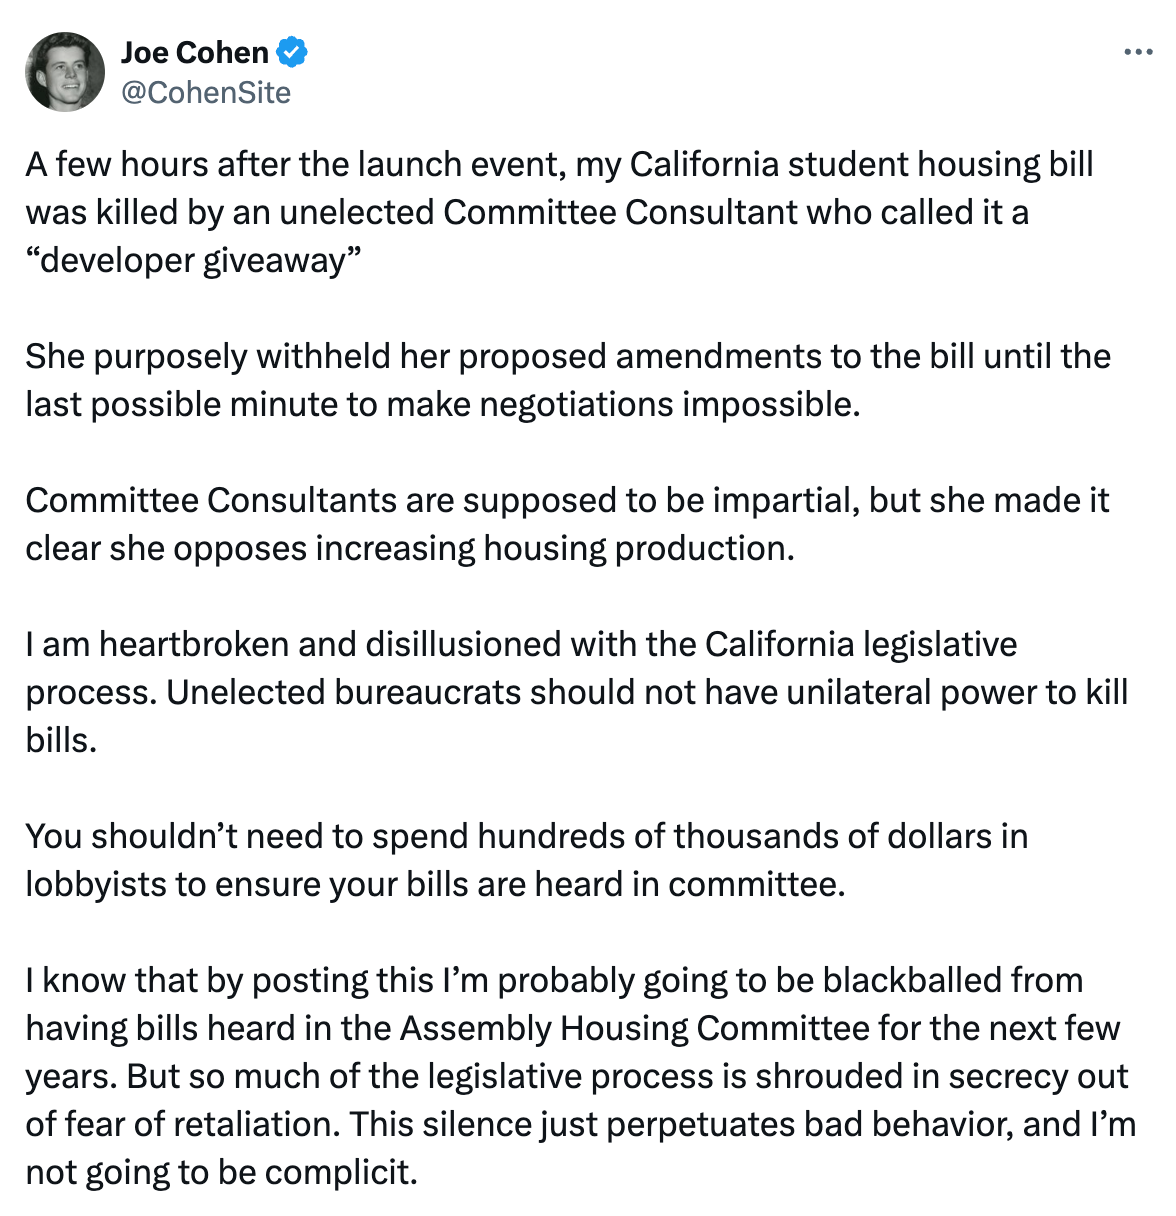  See new posts Conversation Joe Cohen @CohenSite A few hours after the launch event, my California student housing bill was killed by an unelected Committee Consultant who called it a “developer giveaway”  She purposely withheld her proposed amendments to the bill until the last possible minute to make negotiations impossible.  Committee Consultants are supposed to be impartial, but she made it clear she opposes increasing housing production.  I am heartbroken and disillusioned with the California legislative process. Unelected bureaucrats should not have unilateral power to kill bills.  You shouldn’t need to spend hundreds of thousands of dollars in lobbyists to ensure your bills are heard in committee.  I know that by posting this I’m probably going to be blackballed from having bills heard in the Assembly Housing Committee for the next few years. But so much of the legislative process is shrouded in secrecy out of fear of retaliation. This silence just perpetuates bad behavior, and I’m not going to be complicit. 8:05 PM · Apr 9, 2024 · 297K  Views